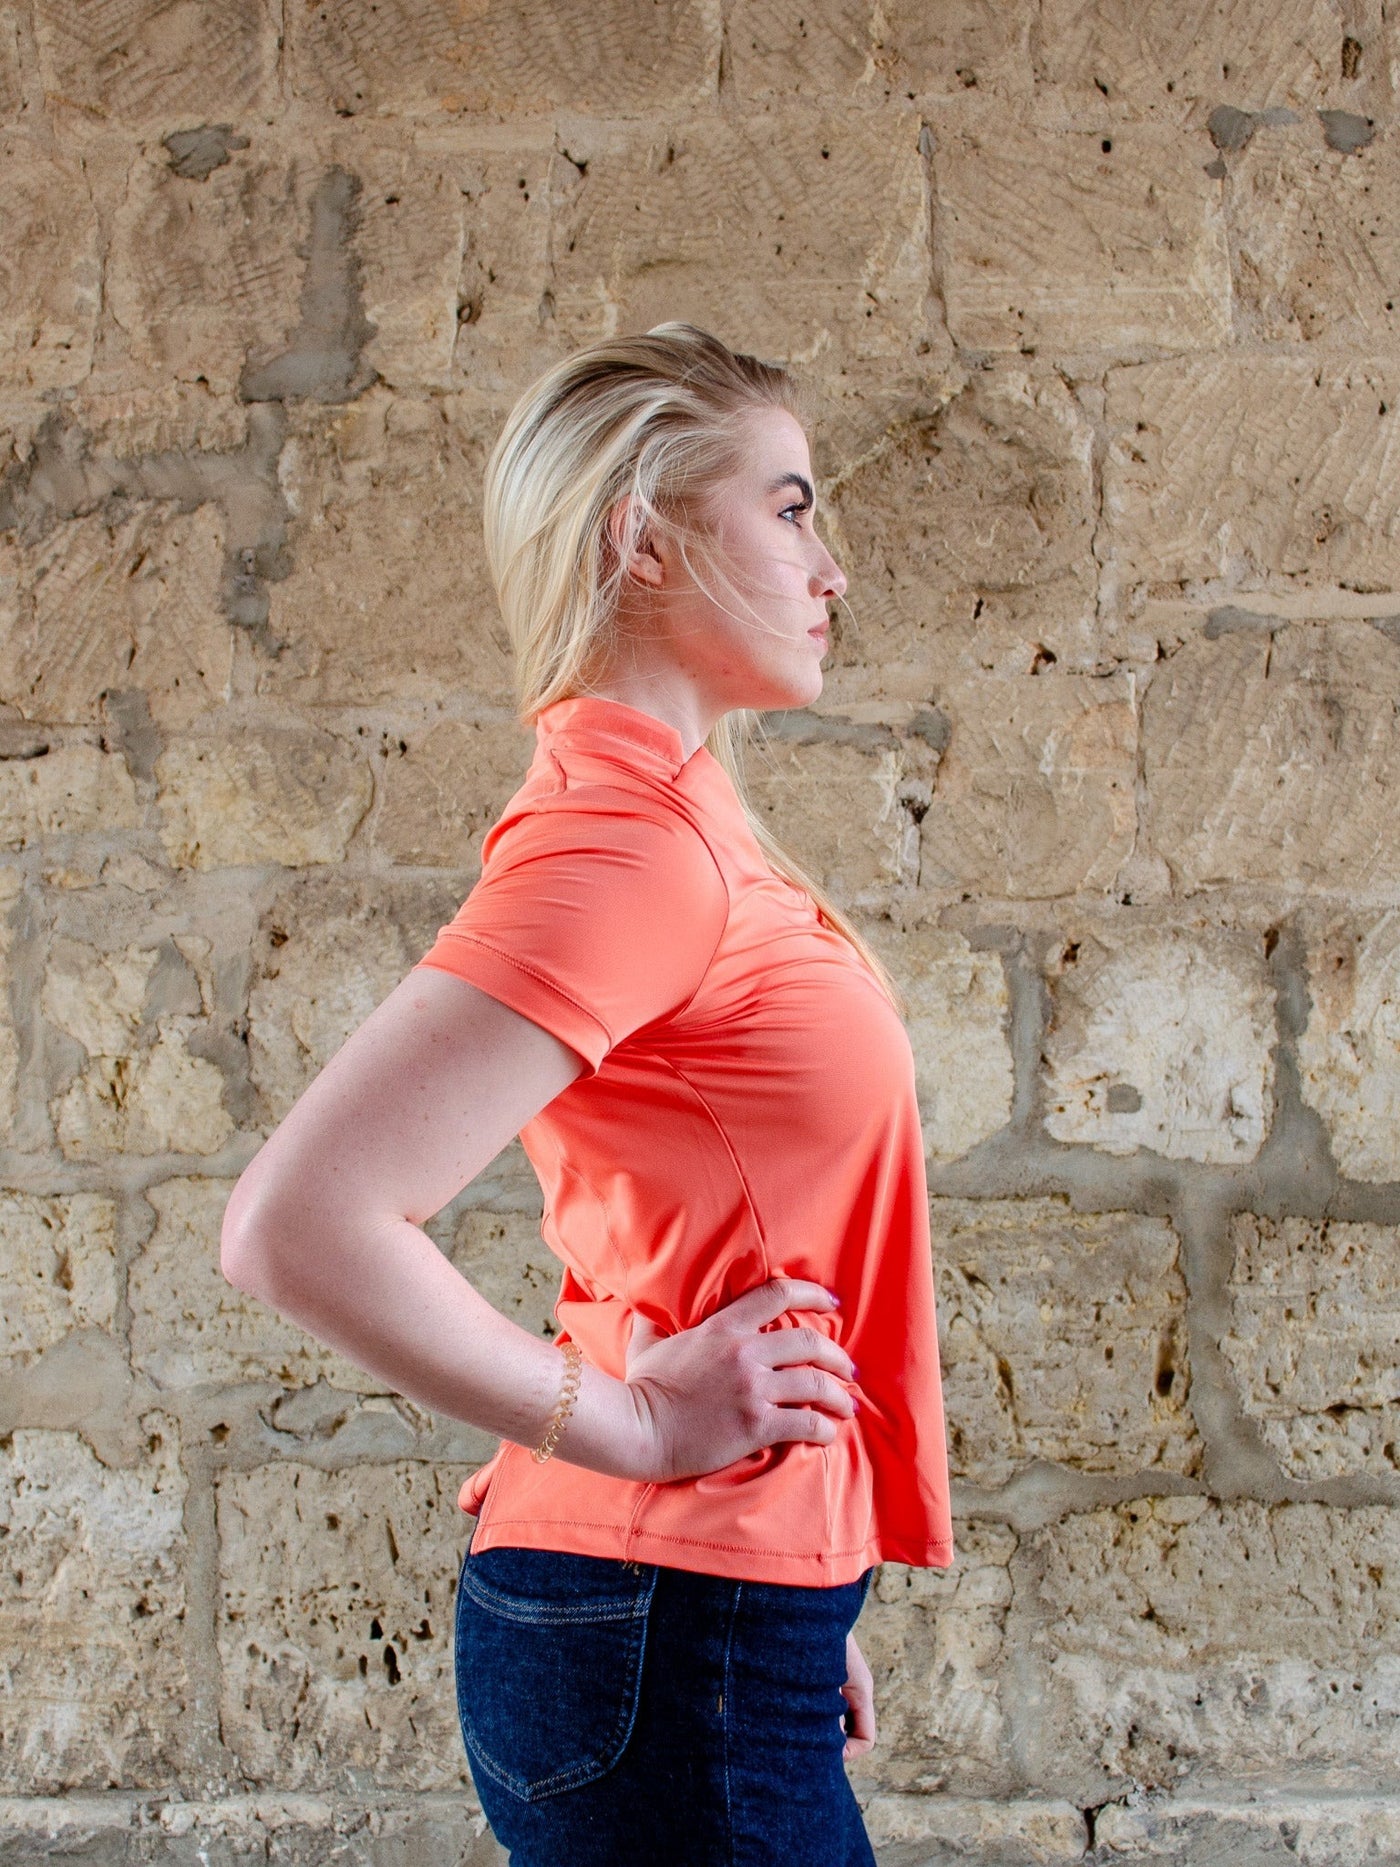 Model is wearing a orange colored collared athletic short sleeve t-shirt. T-shirt worn with jeans